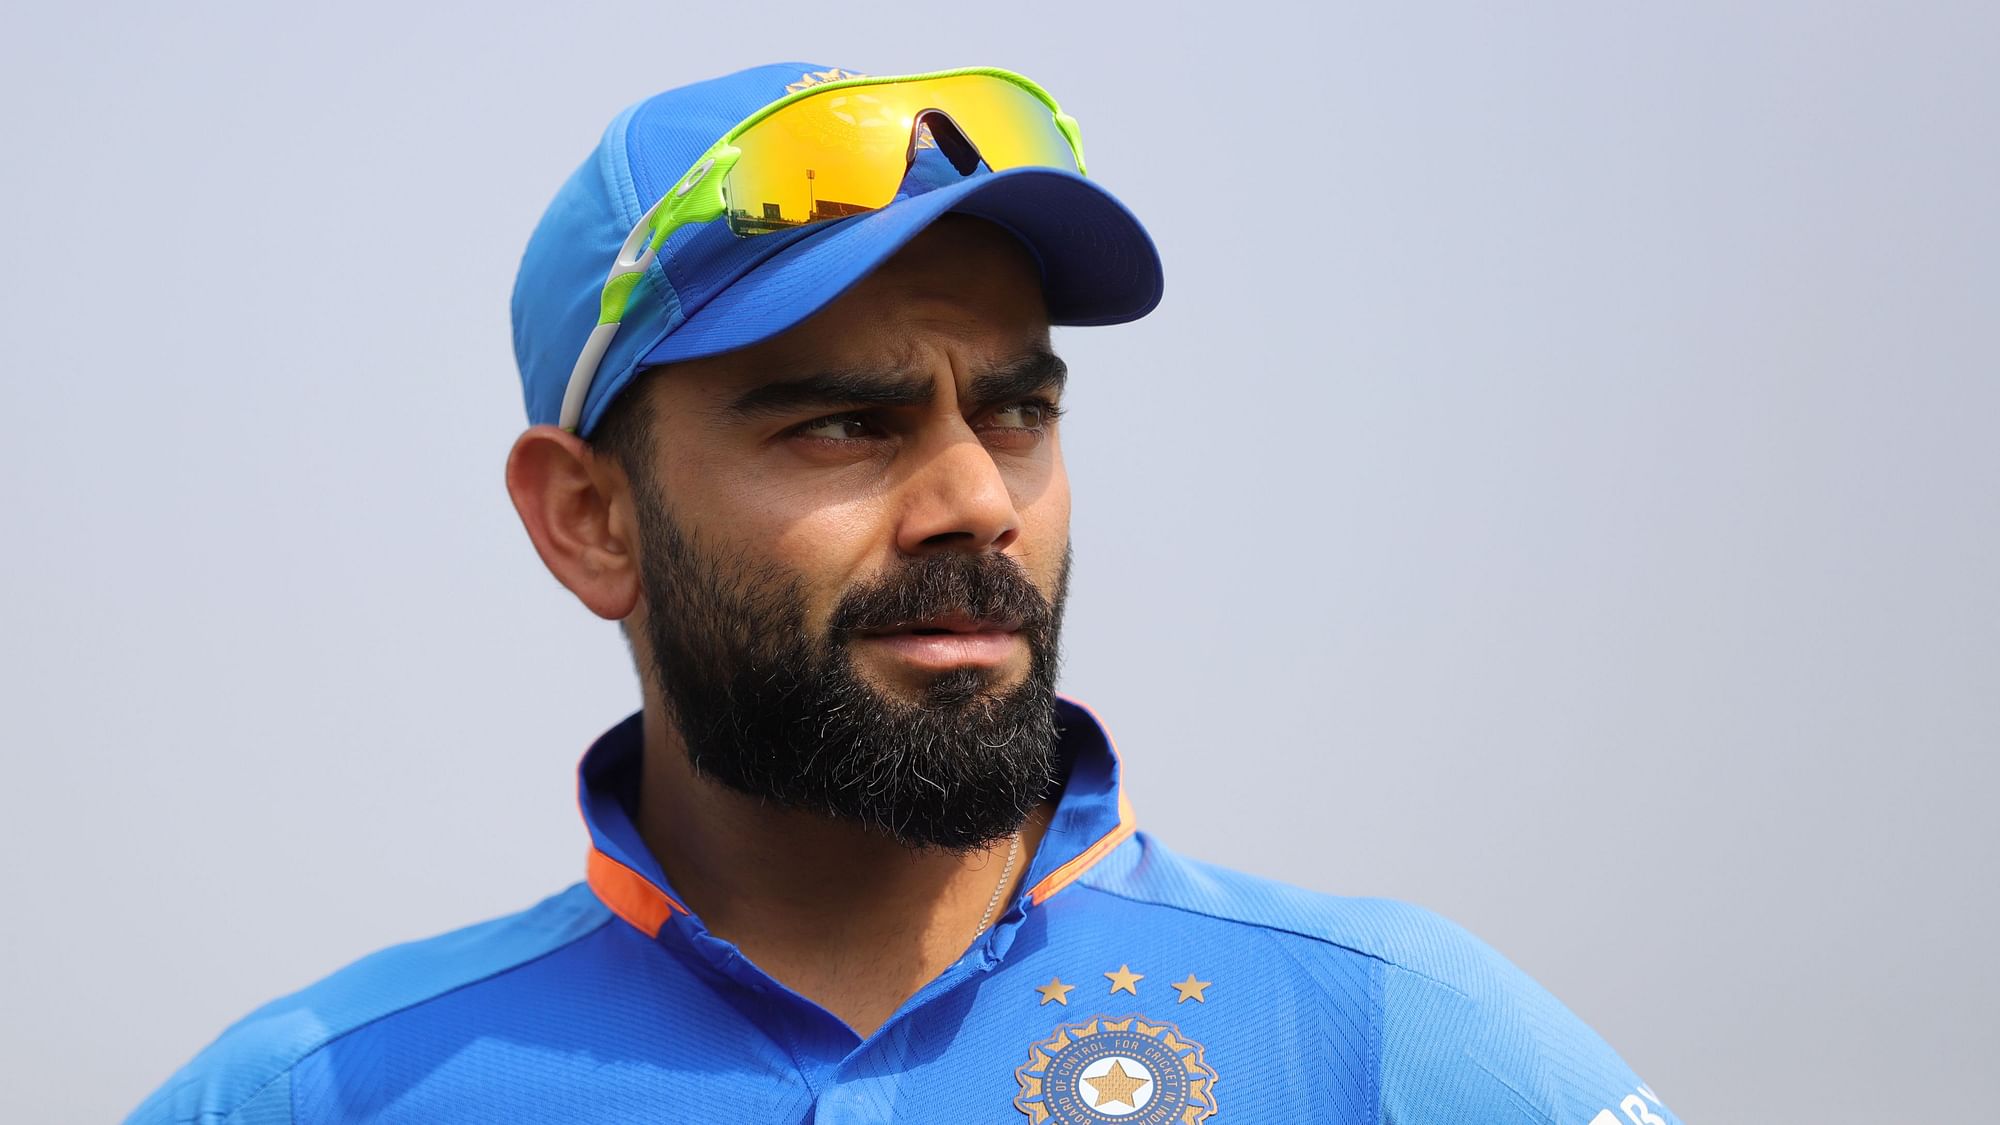 Virat Kohli also said 2019 has been one of the best years for Indian cricket.